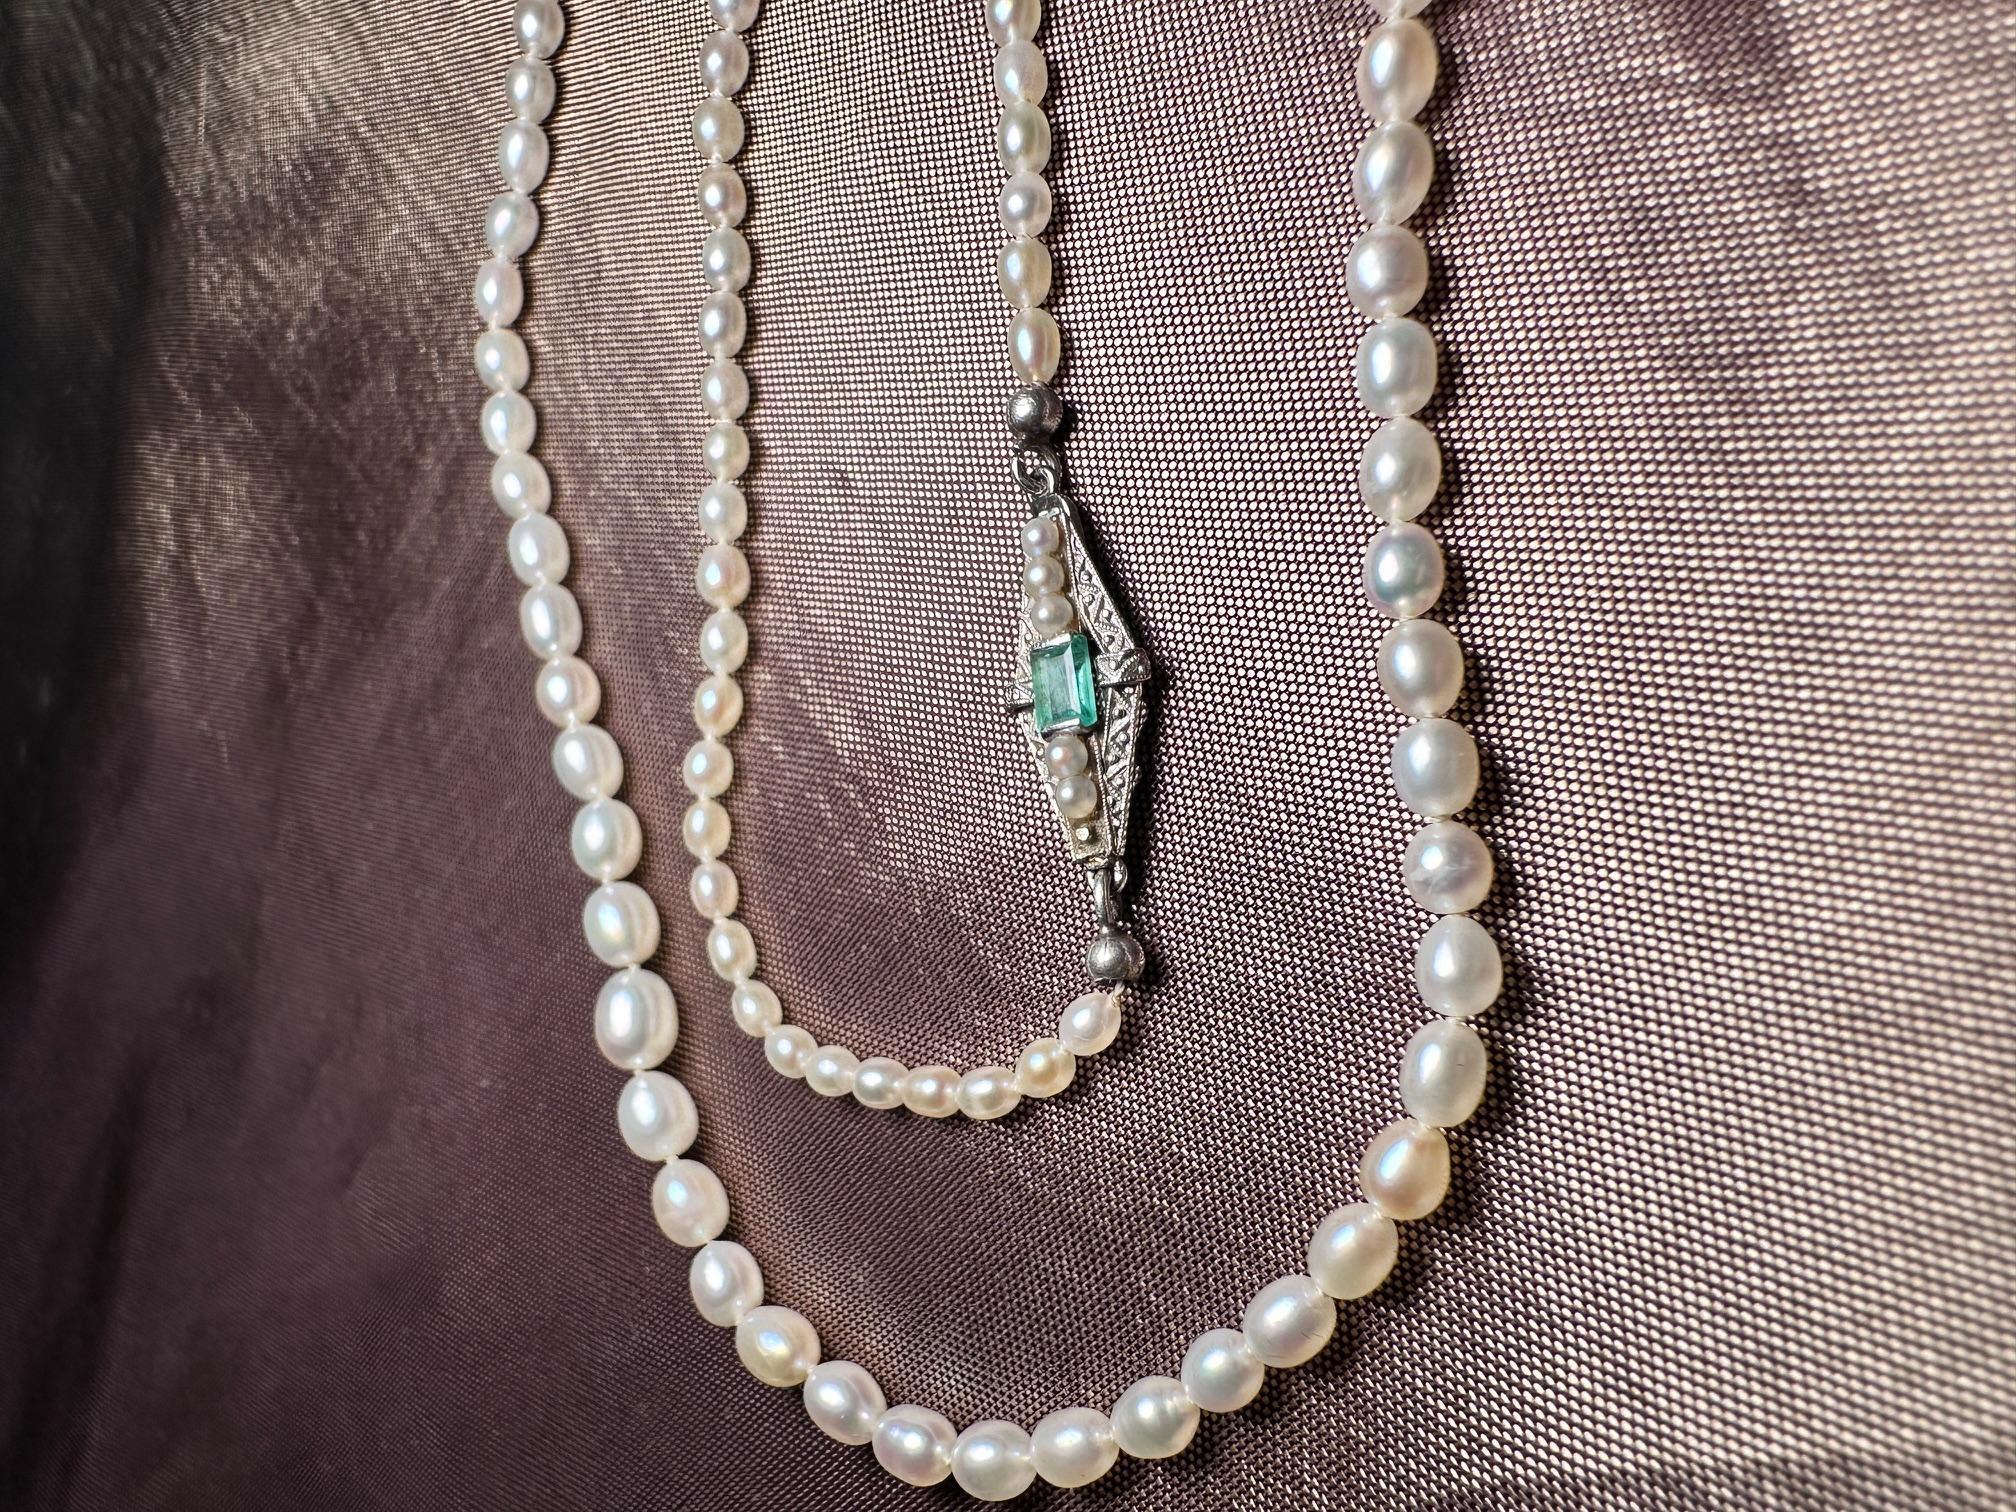 A beautiful and elegant natural pearl necklace with an emerald and old cut diamond clasp. 

It comes with a certificate.